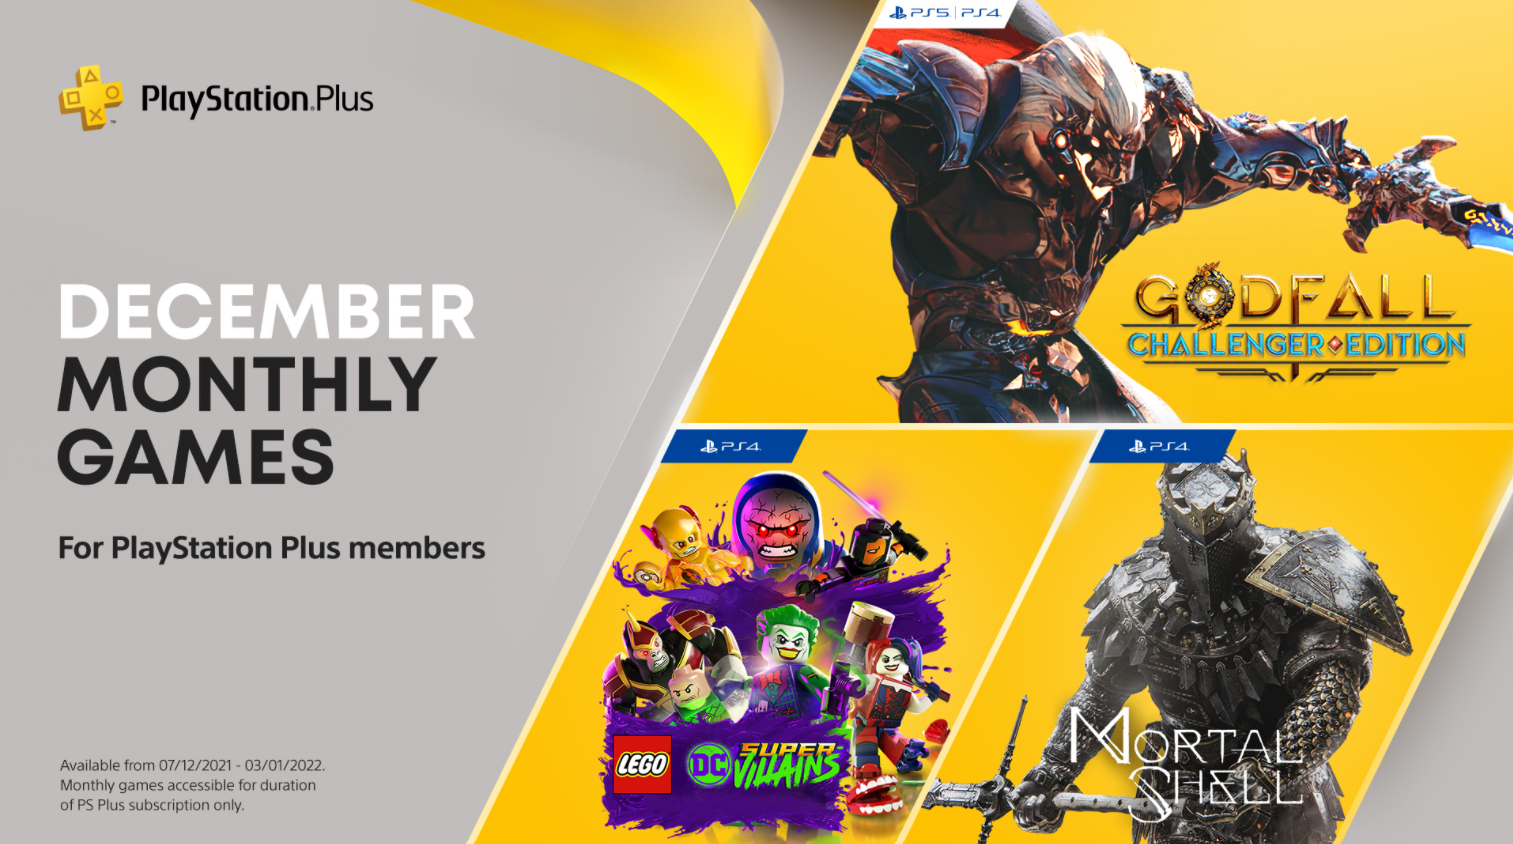 PS Plus June 2020 free PS4 games warning - DO NOT re-subscribe to